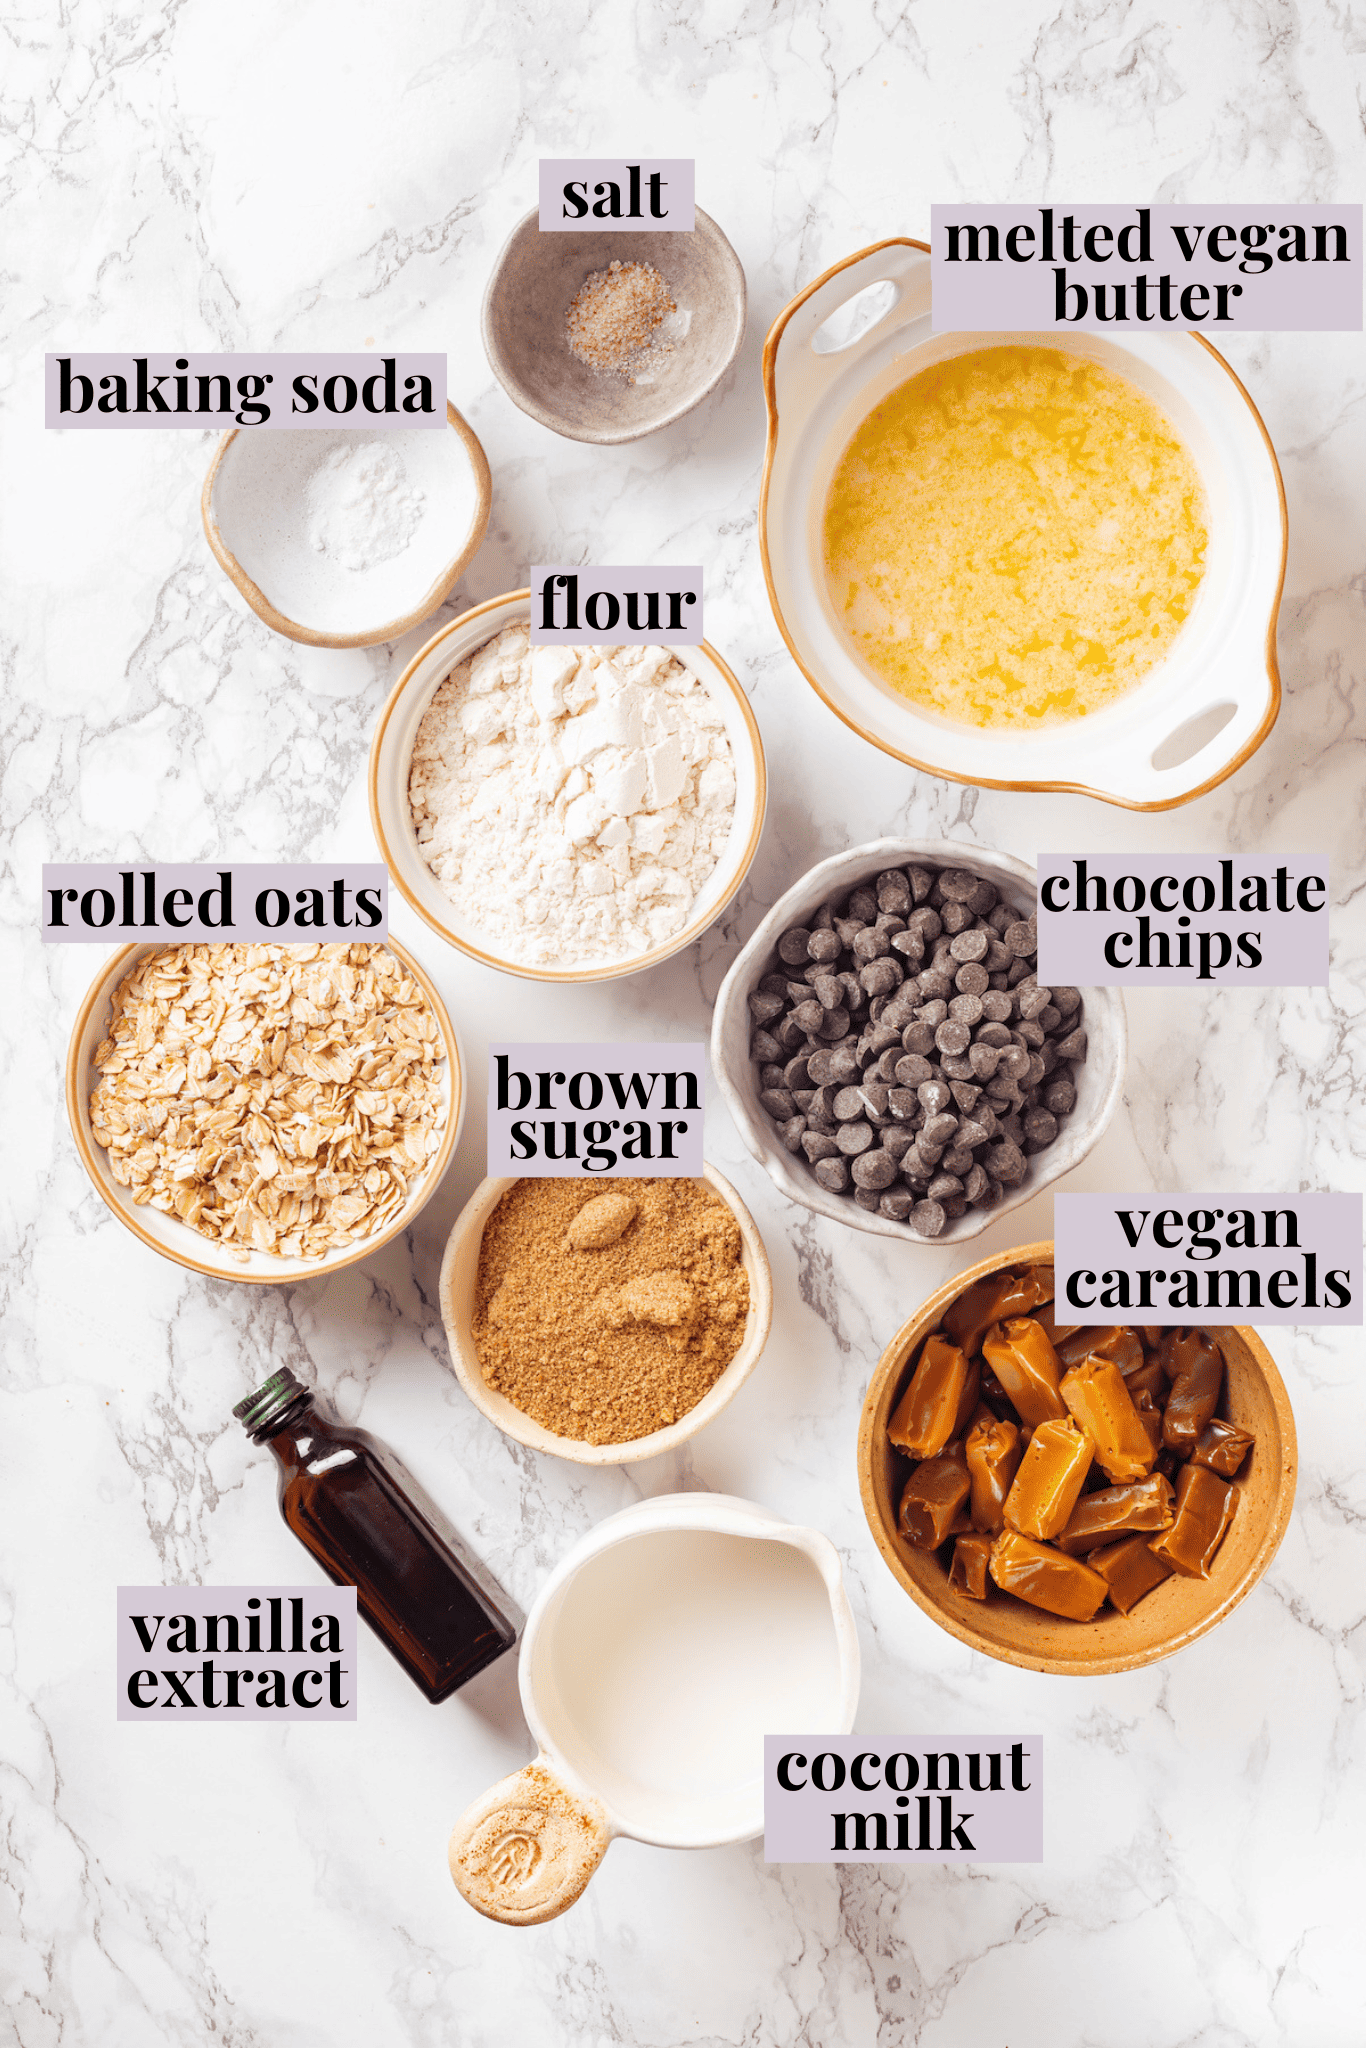 Overhead view of ingredients for carmelitas with labels